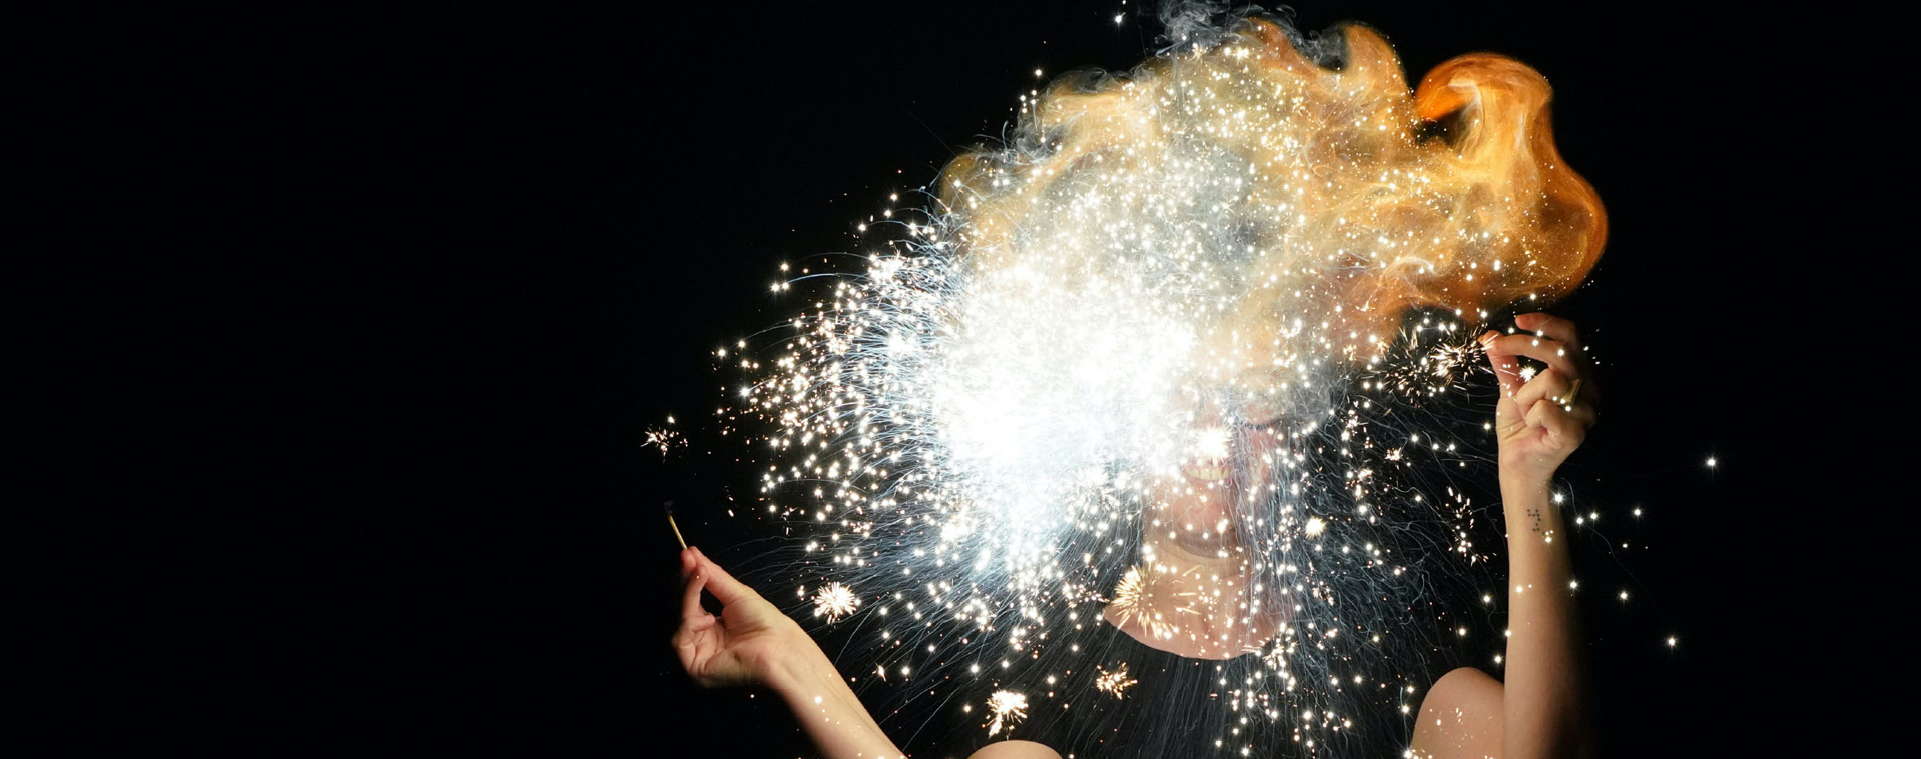 A close-up of a person’s face obscured by an explosion of sparks and fire against a black background.